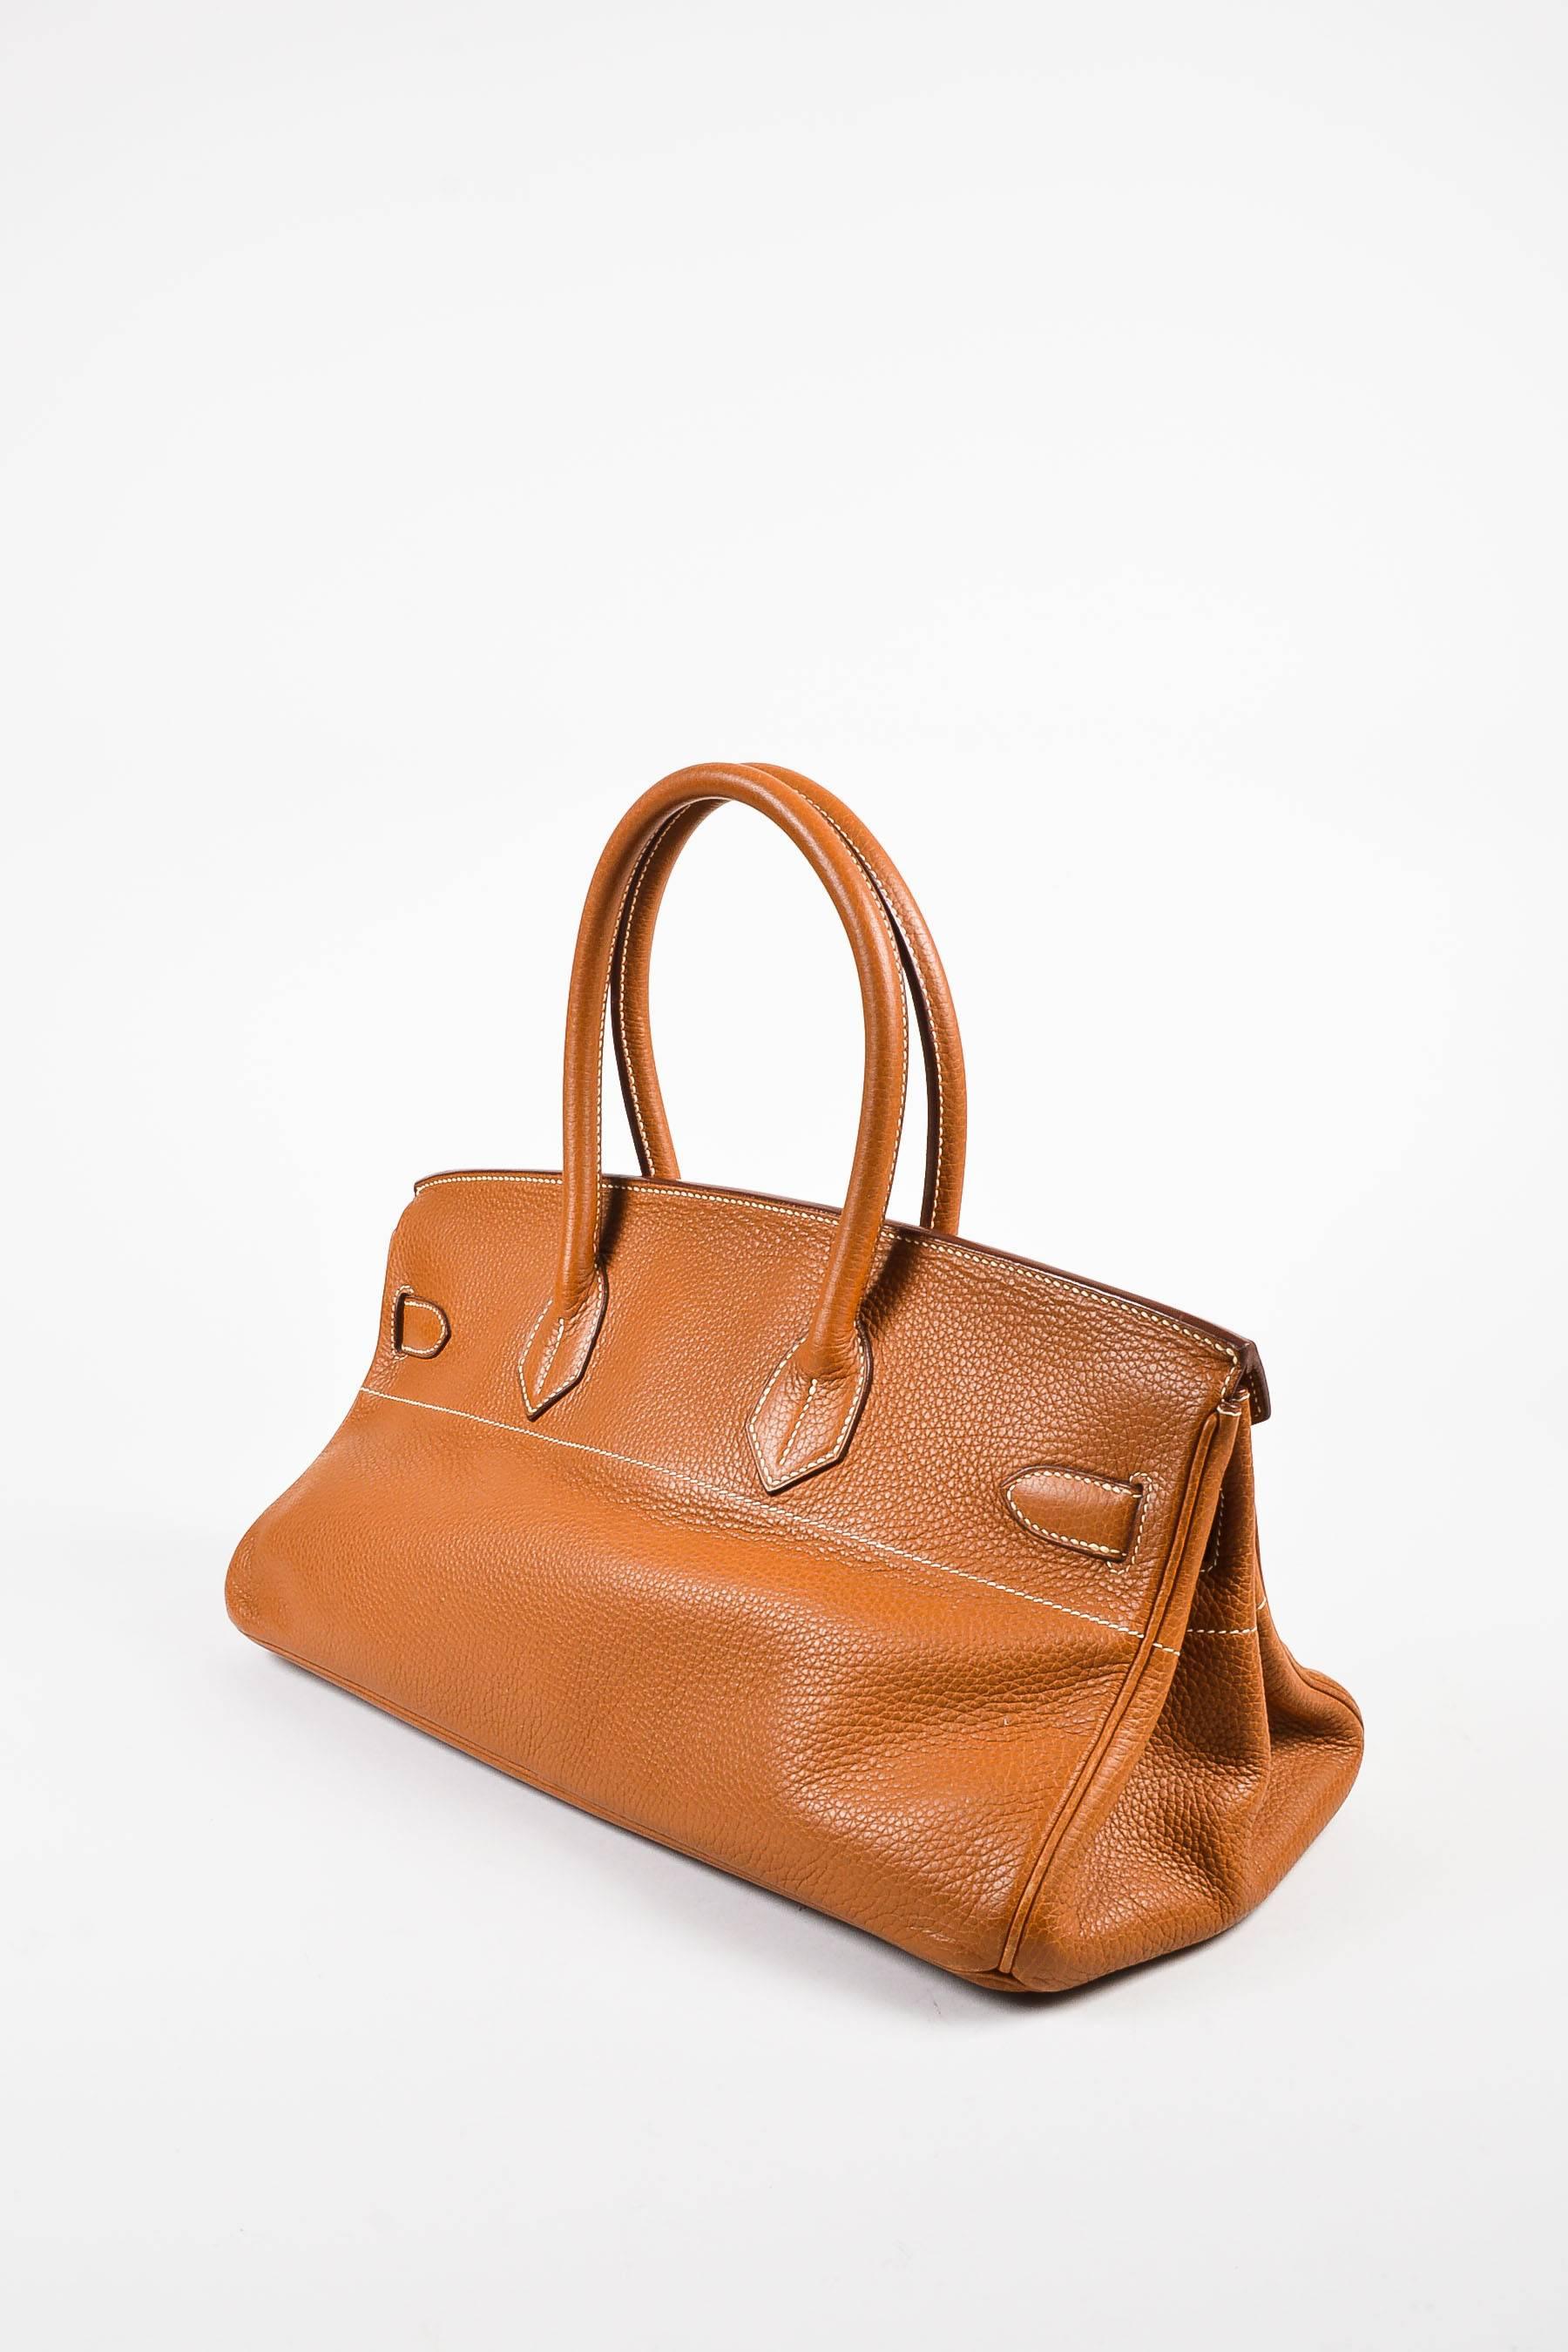 This highly coveted tote is the perfect bag to carry your everyday essentials in classic sophistication. The 